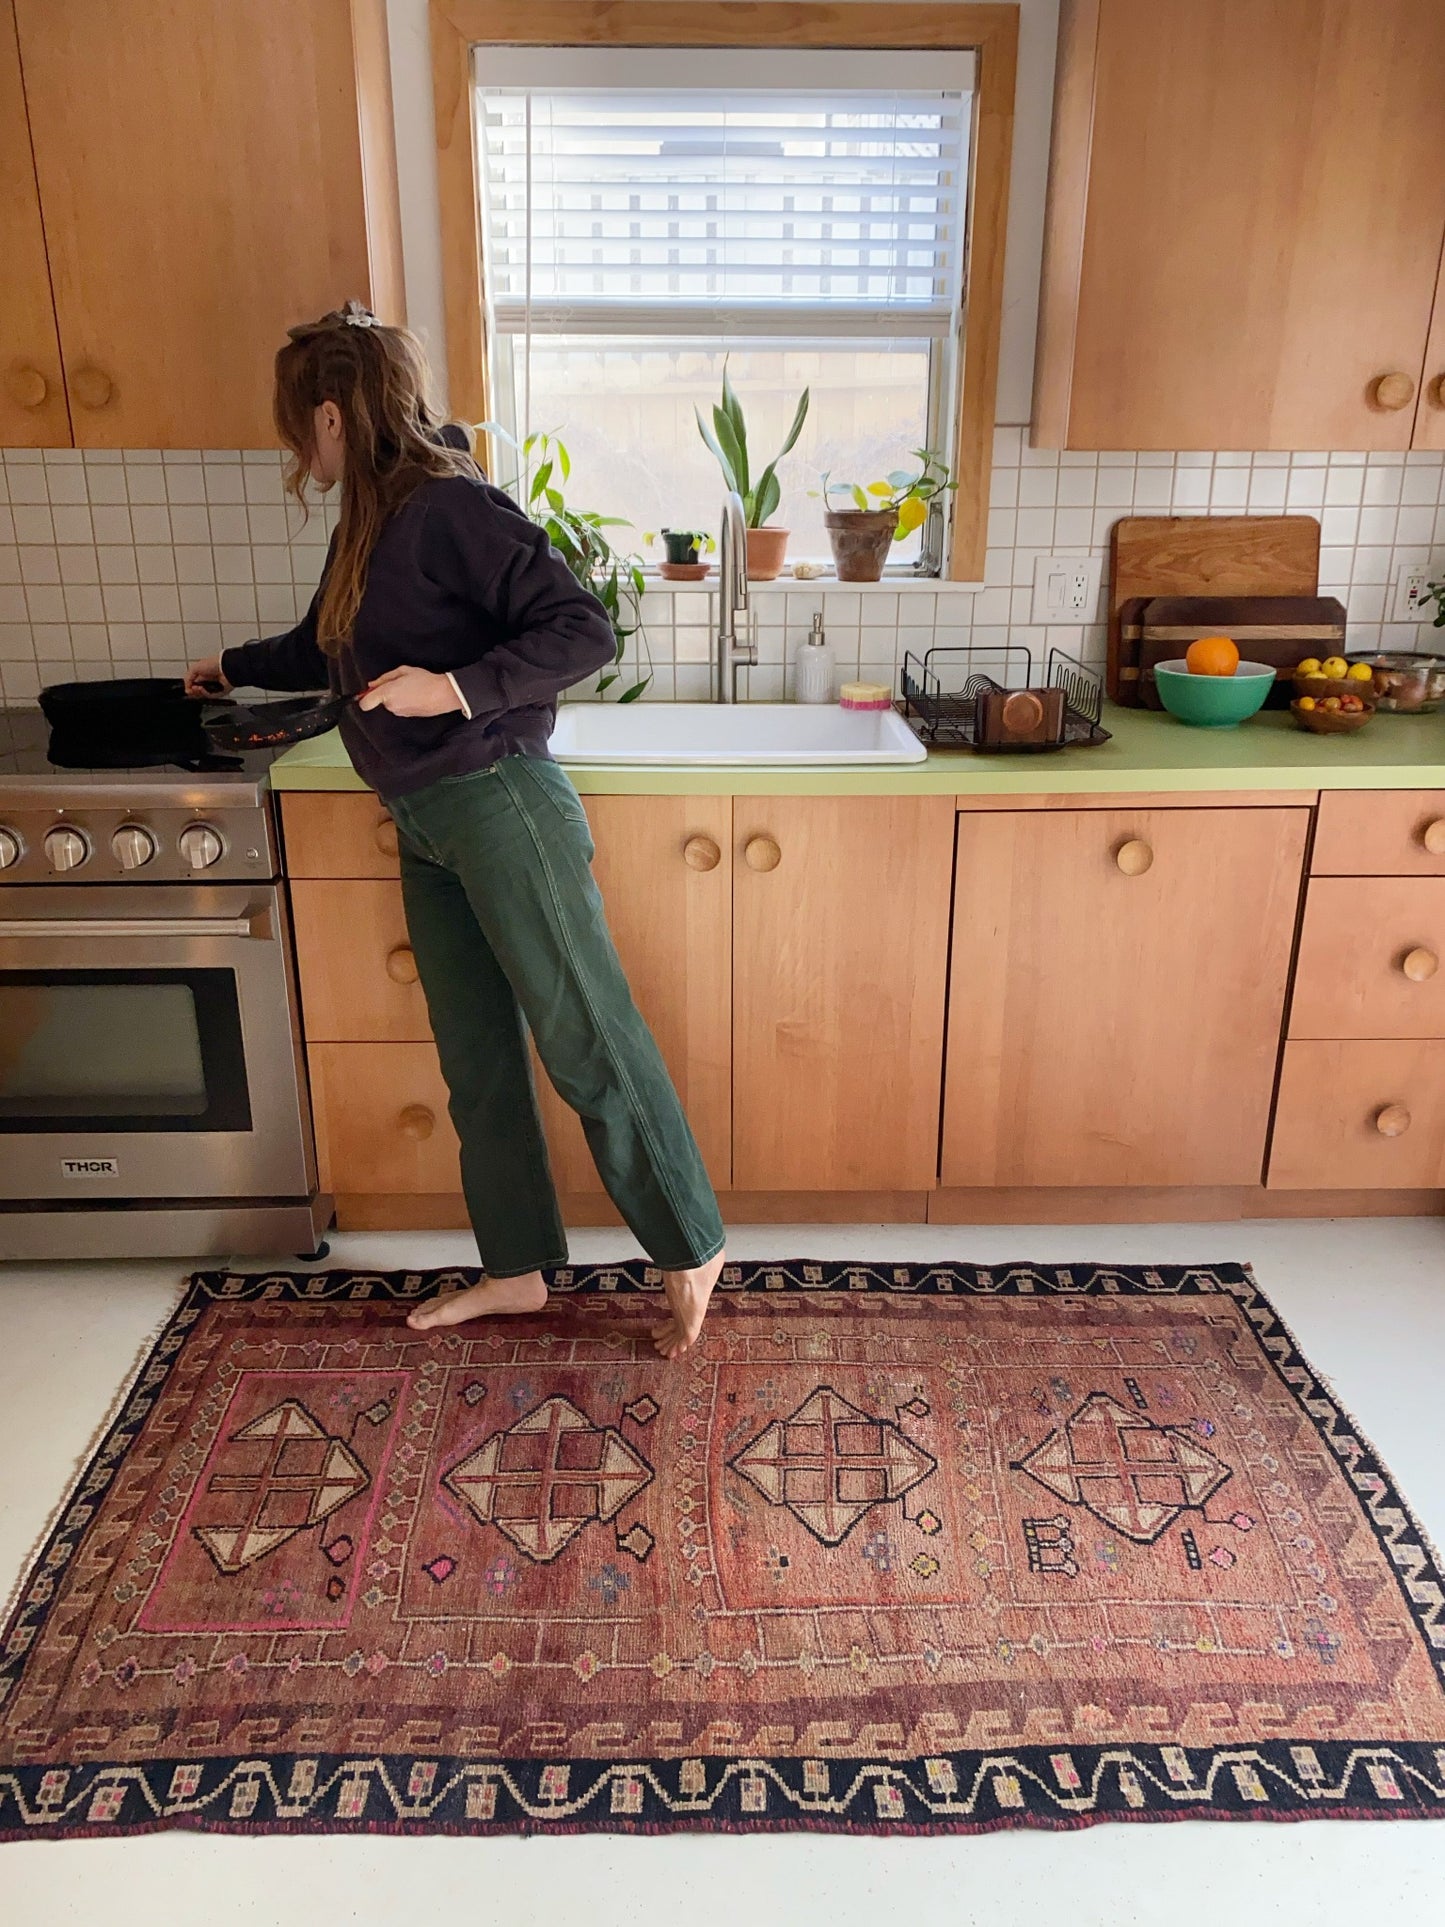 See Lata Persian Rug Styled in a Kitchen